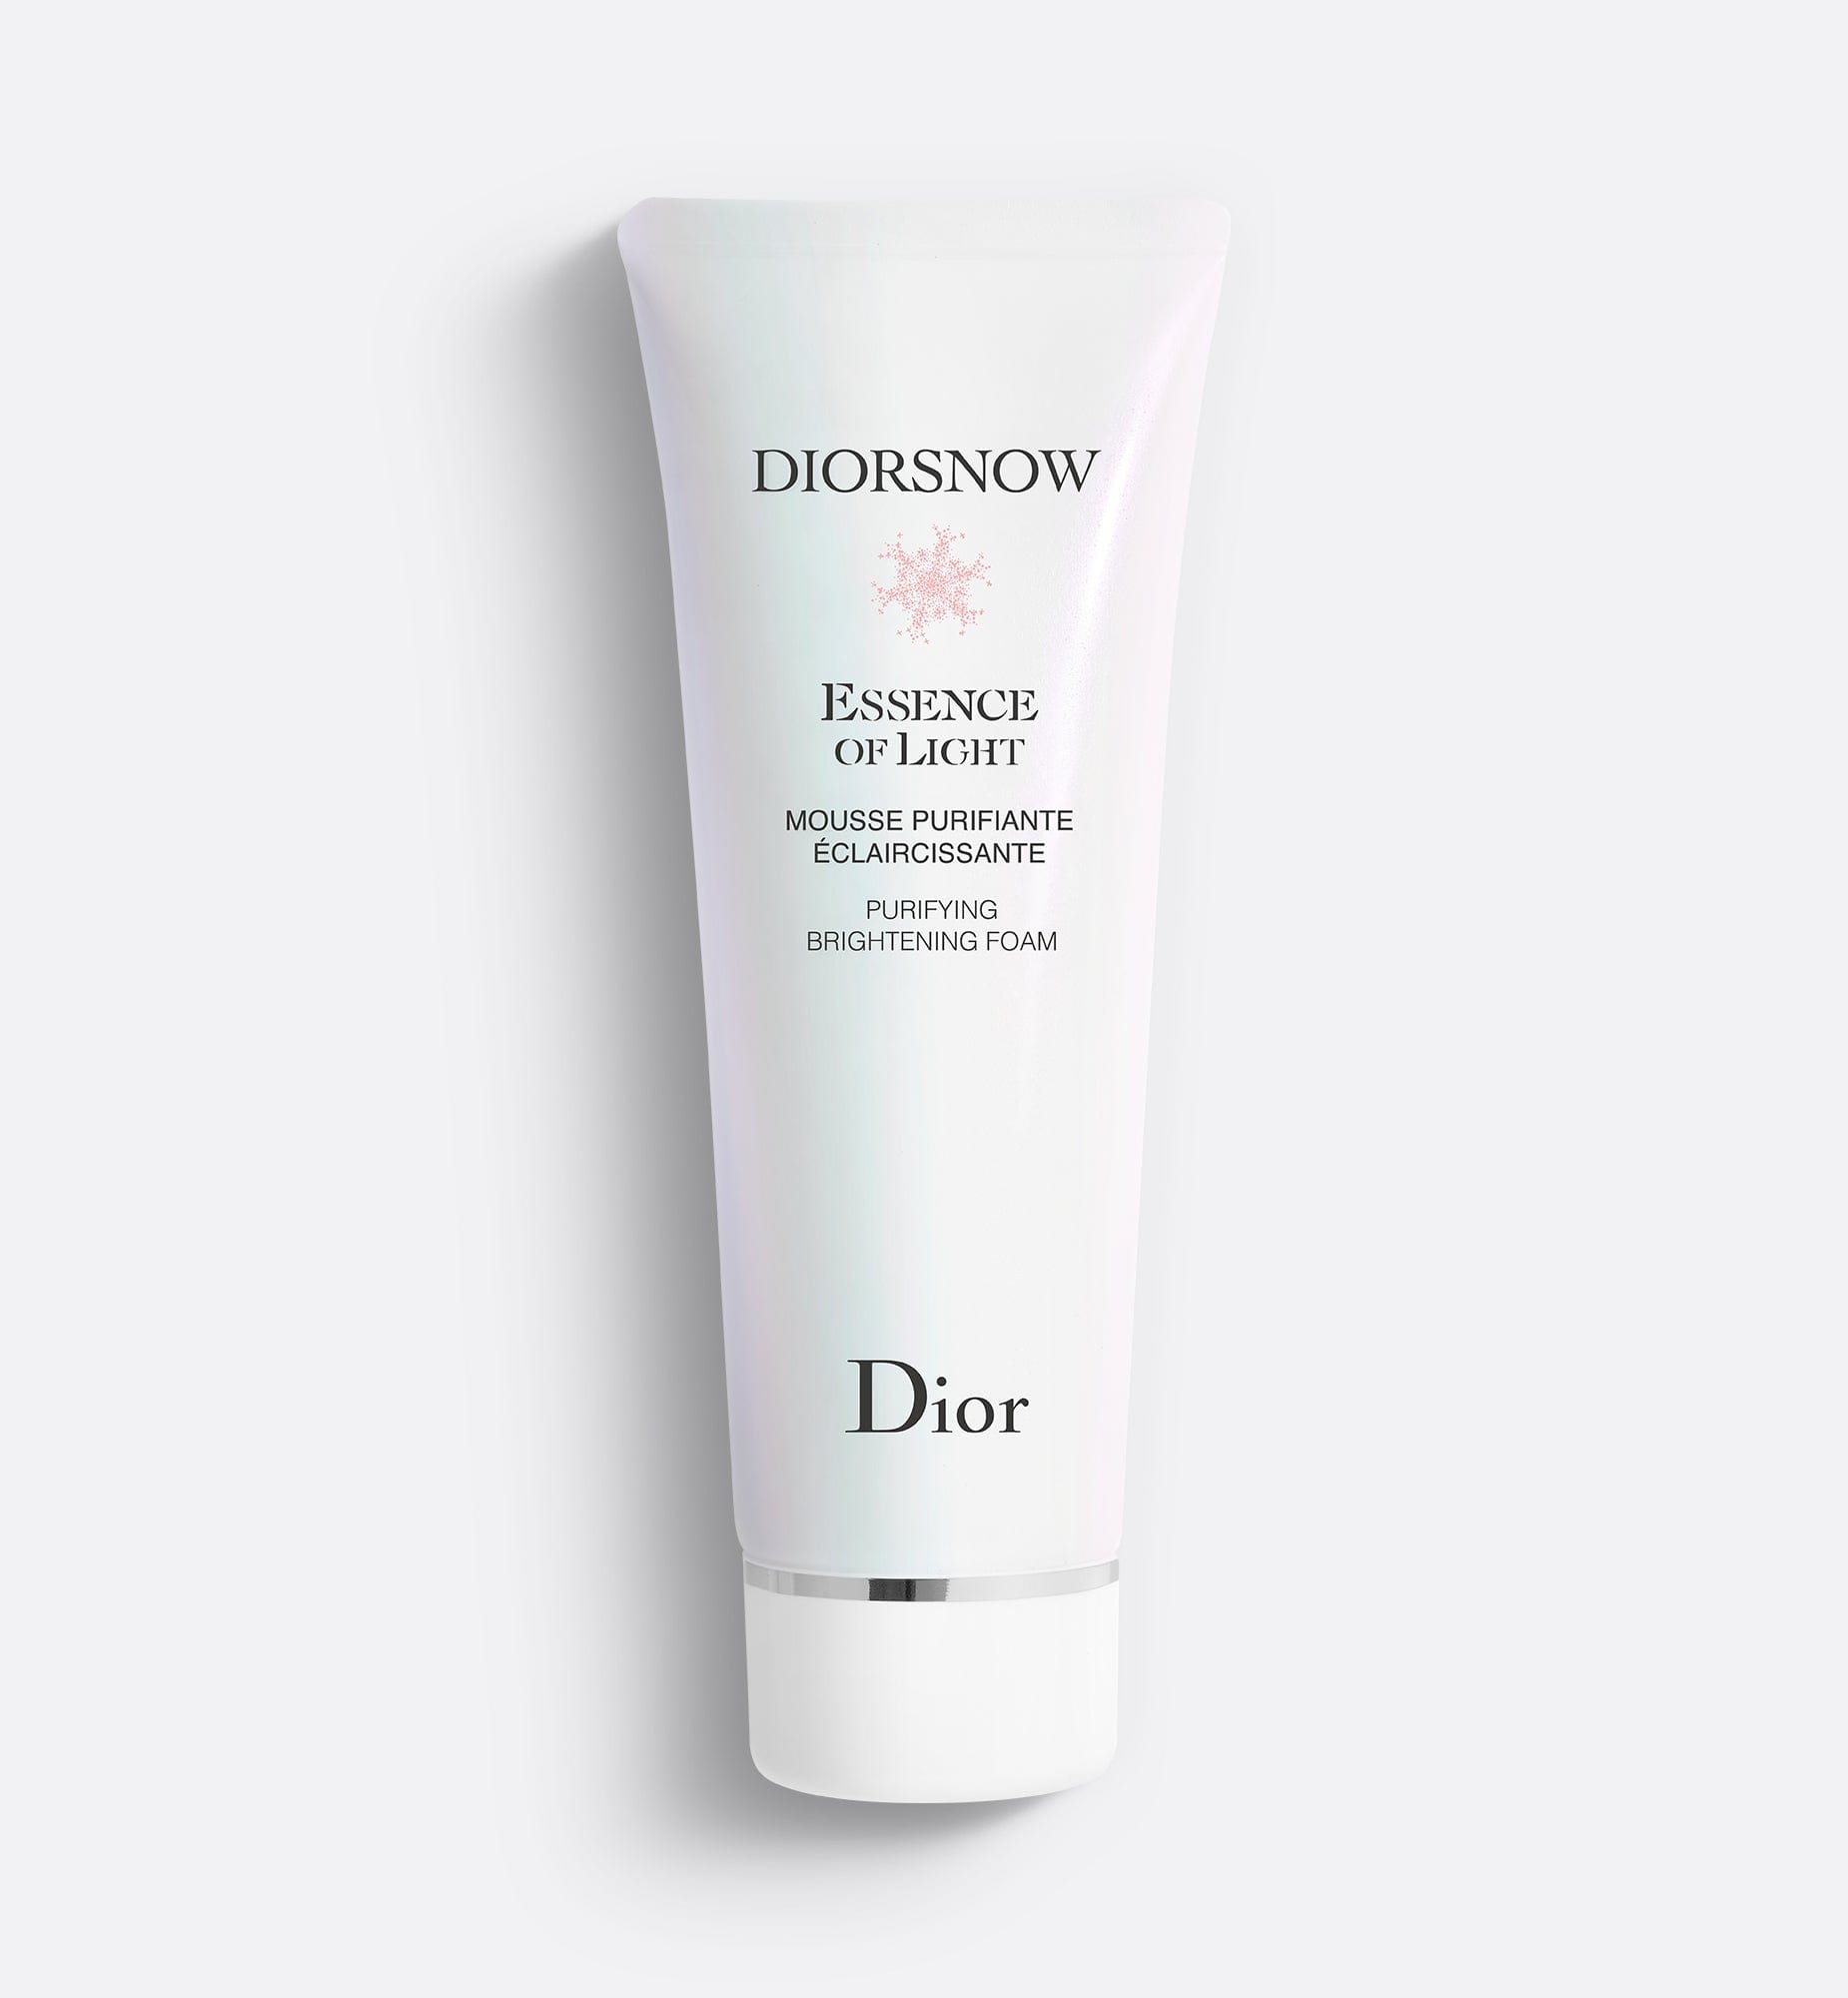 DIORSNOW ESSENCE OF LIGHT PURIFYING BRIGHTENING FOAM | Face Cleanser - Cleanses, Purifies and Revives Radiance